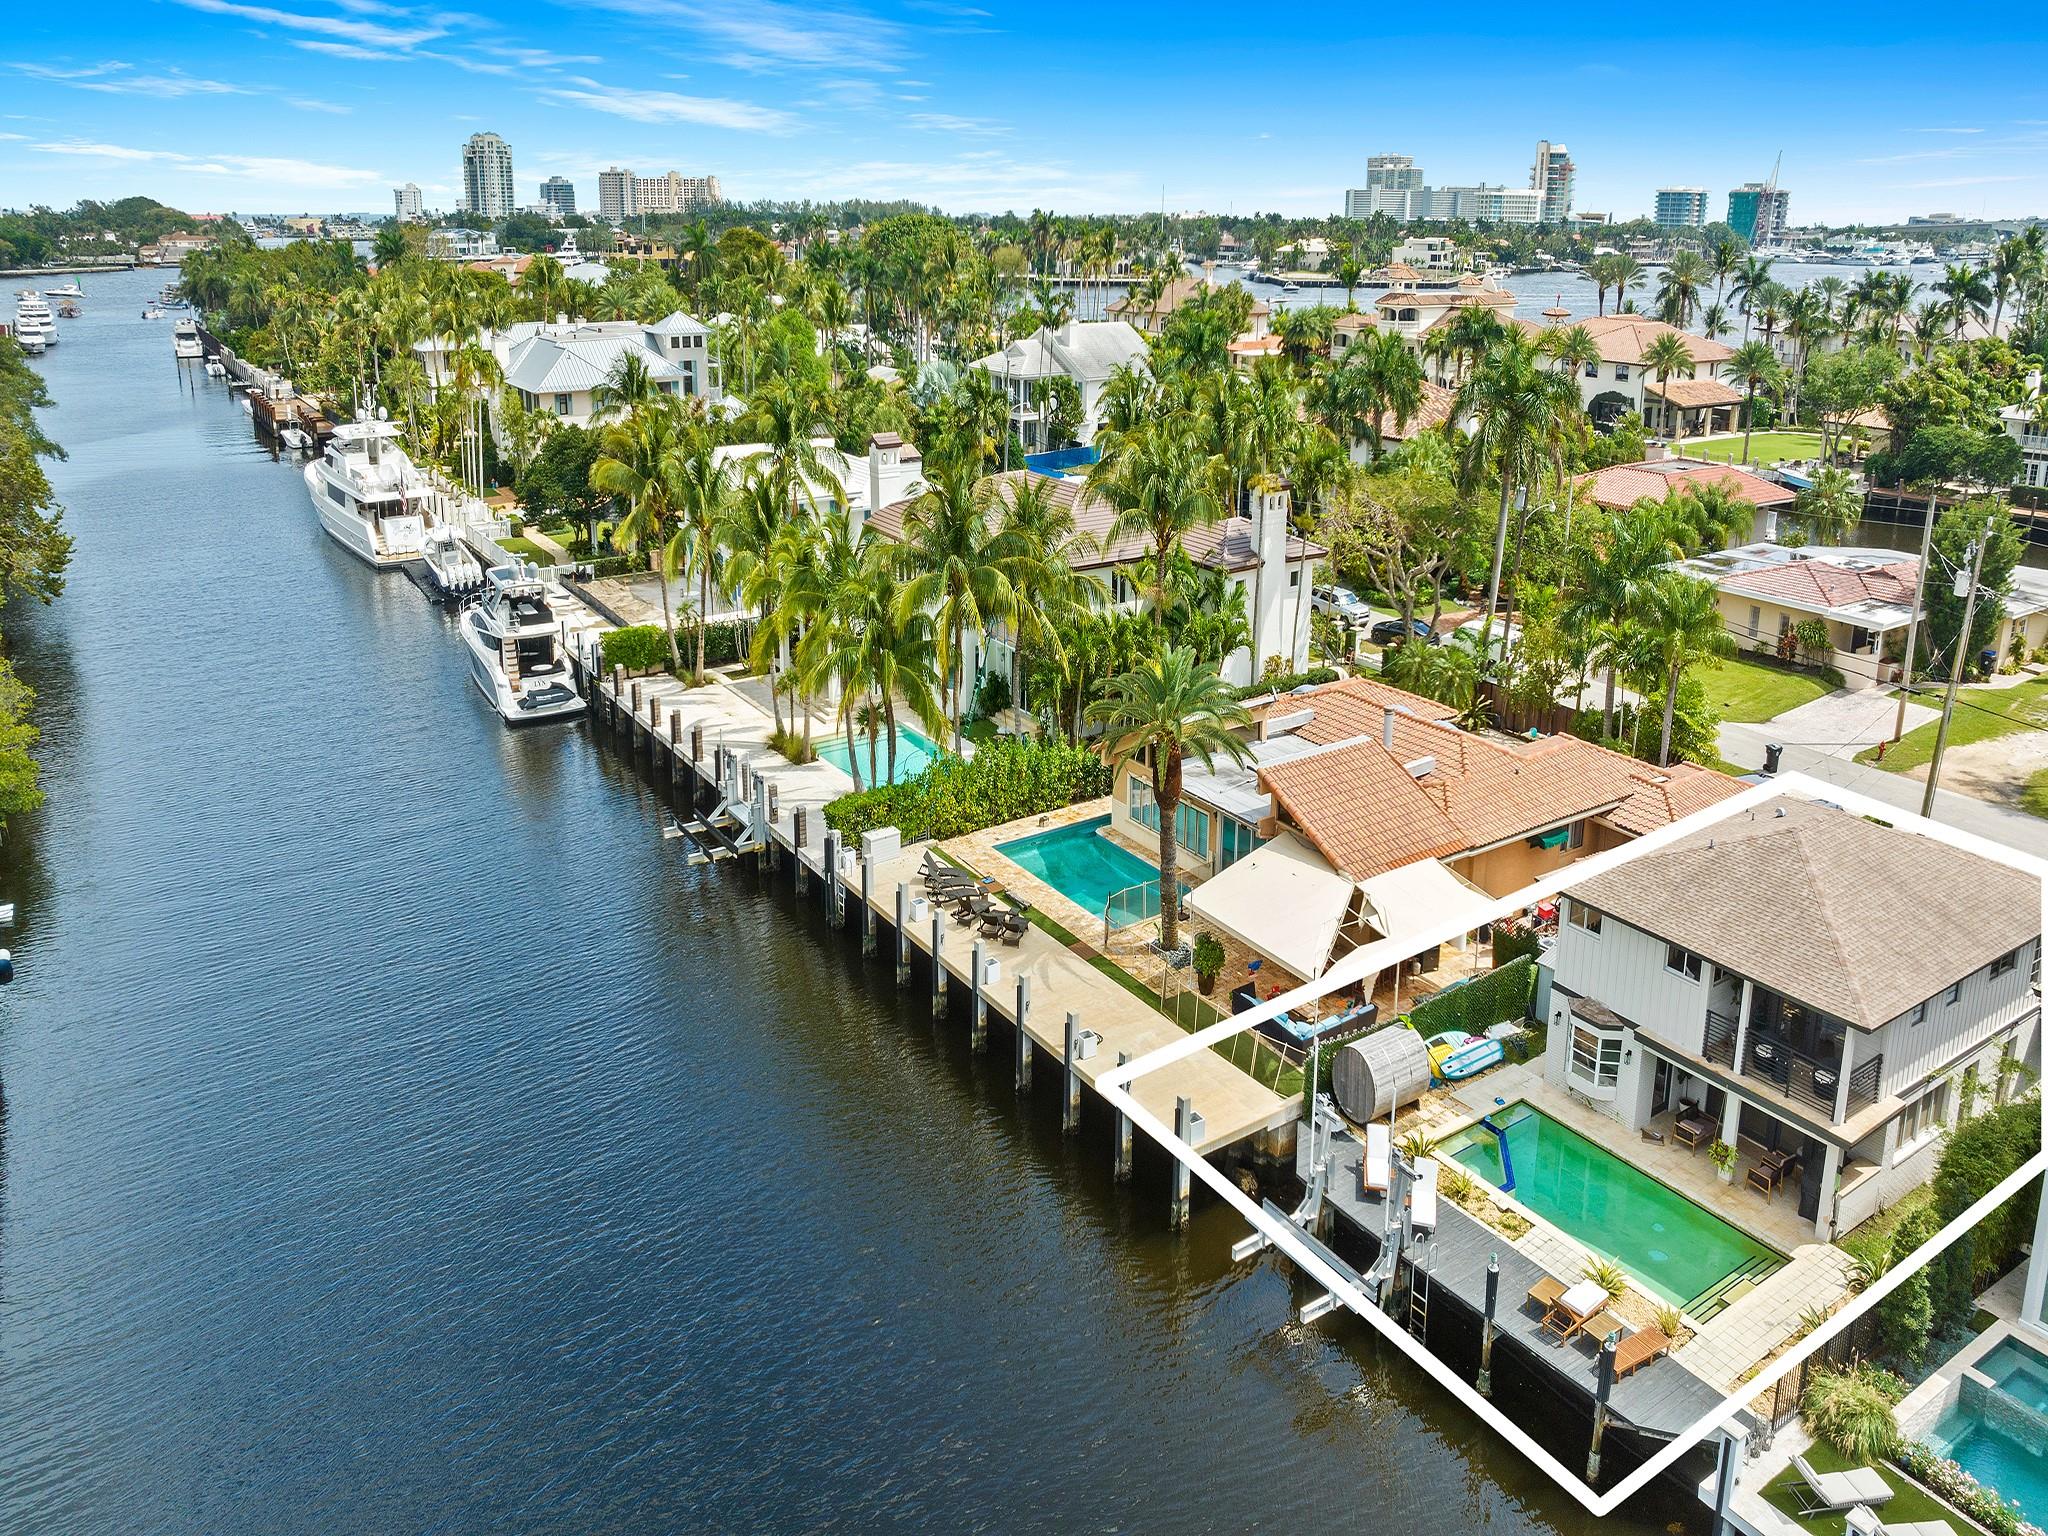 Located at one of the finest isles of Rio Vista with the quickest ocean access. NO FIXED BRIDGES. Surrounded by multimillion dollar residences. This location is yacht owner's paradise. Impeccably maintained residence sits on a 50FT WATER-FRONTAGE and has stunning water views from every corner. Some of the features include: BOAT LIFT, office room, covered patio with BBQ, brand new deck, fire place, laundry room, driveway, private waterfront terrace, den, HIS AND HER CLOSETS, newer roof, new appliances, brand new AC units, new floors, custom sound system throughout, security cameras at the exterior, grass area for kids & pets and many more! Completely renovated in 2022. Best school district. Great luxury rental potential. Furniture negotiable. No NOA or restrictions.